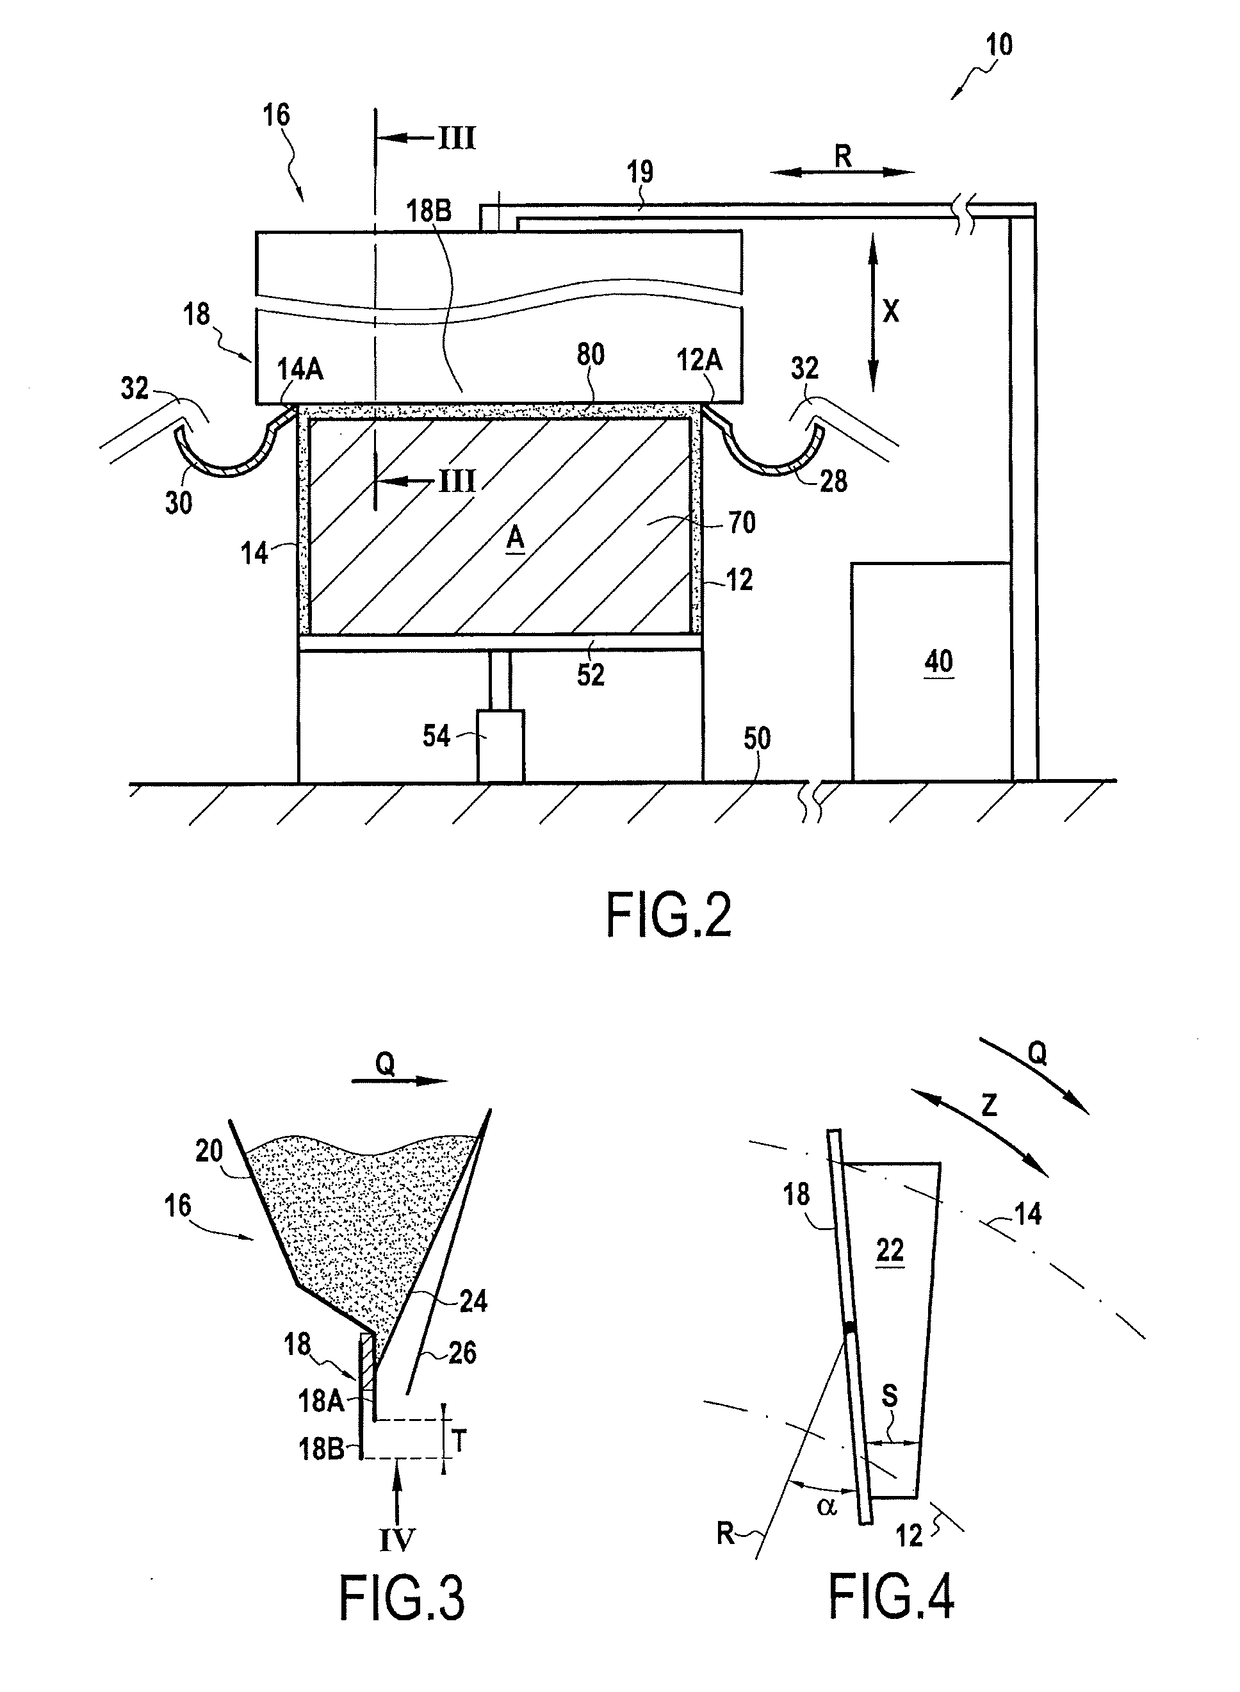 Device for fabricating annular pieces by selectively melting powder, the device including a powder wiper